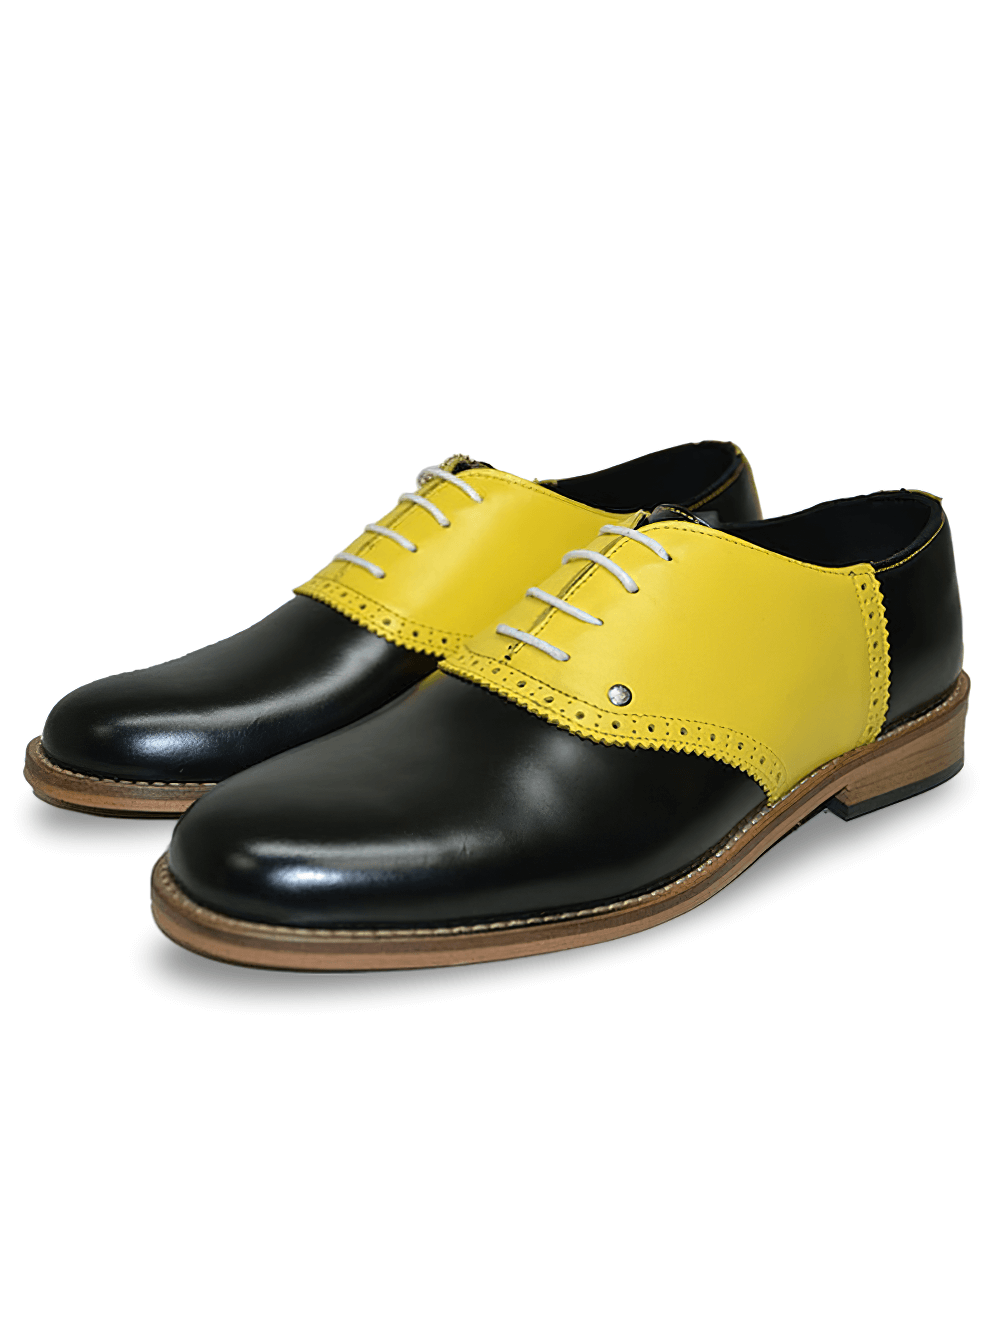 Yellow And Black Leather Bowling Flat Shoes With Round Toes